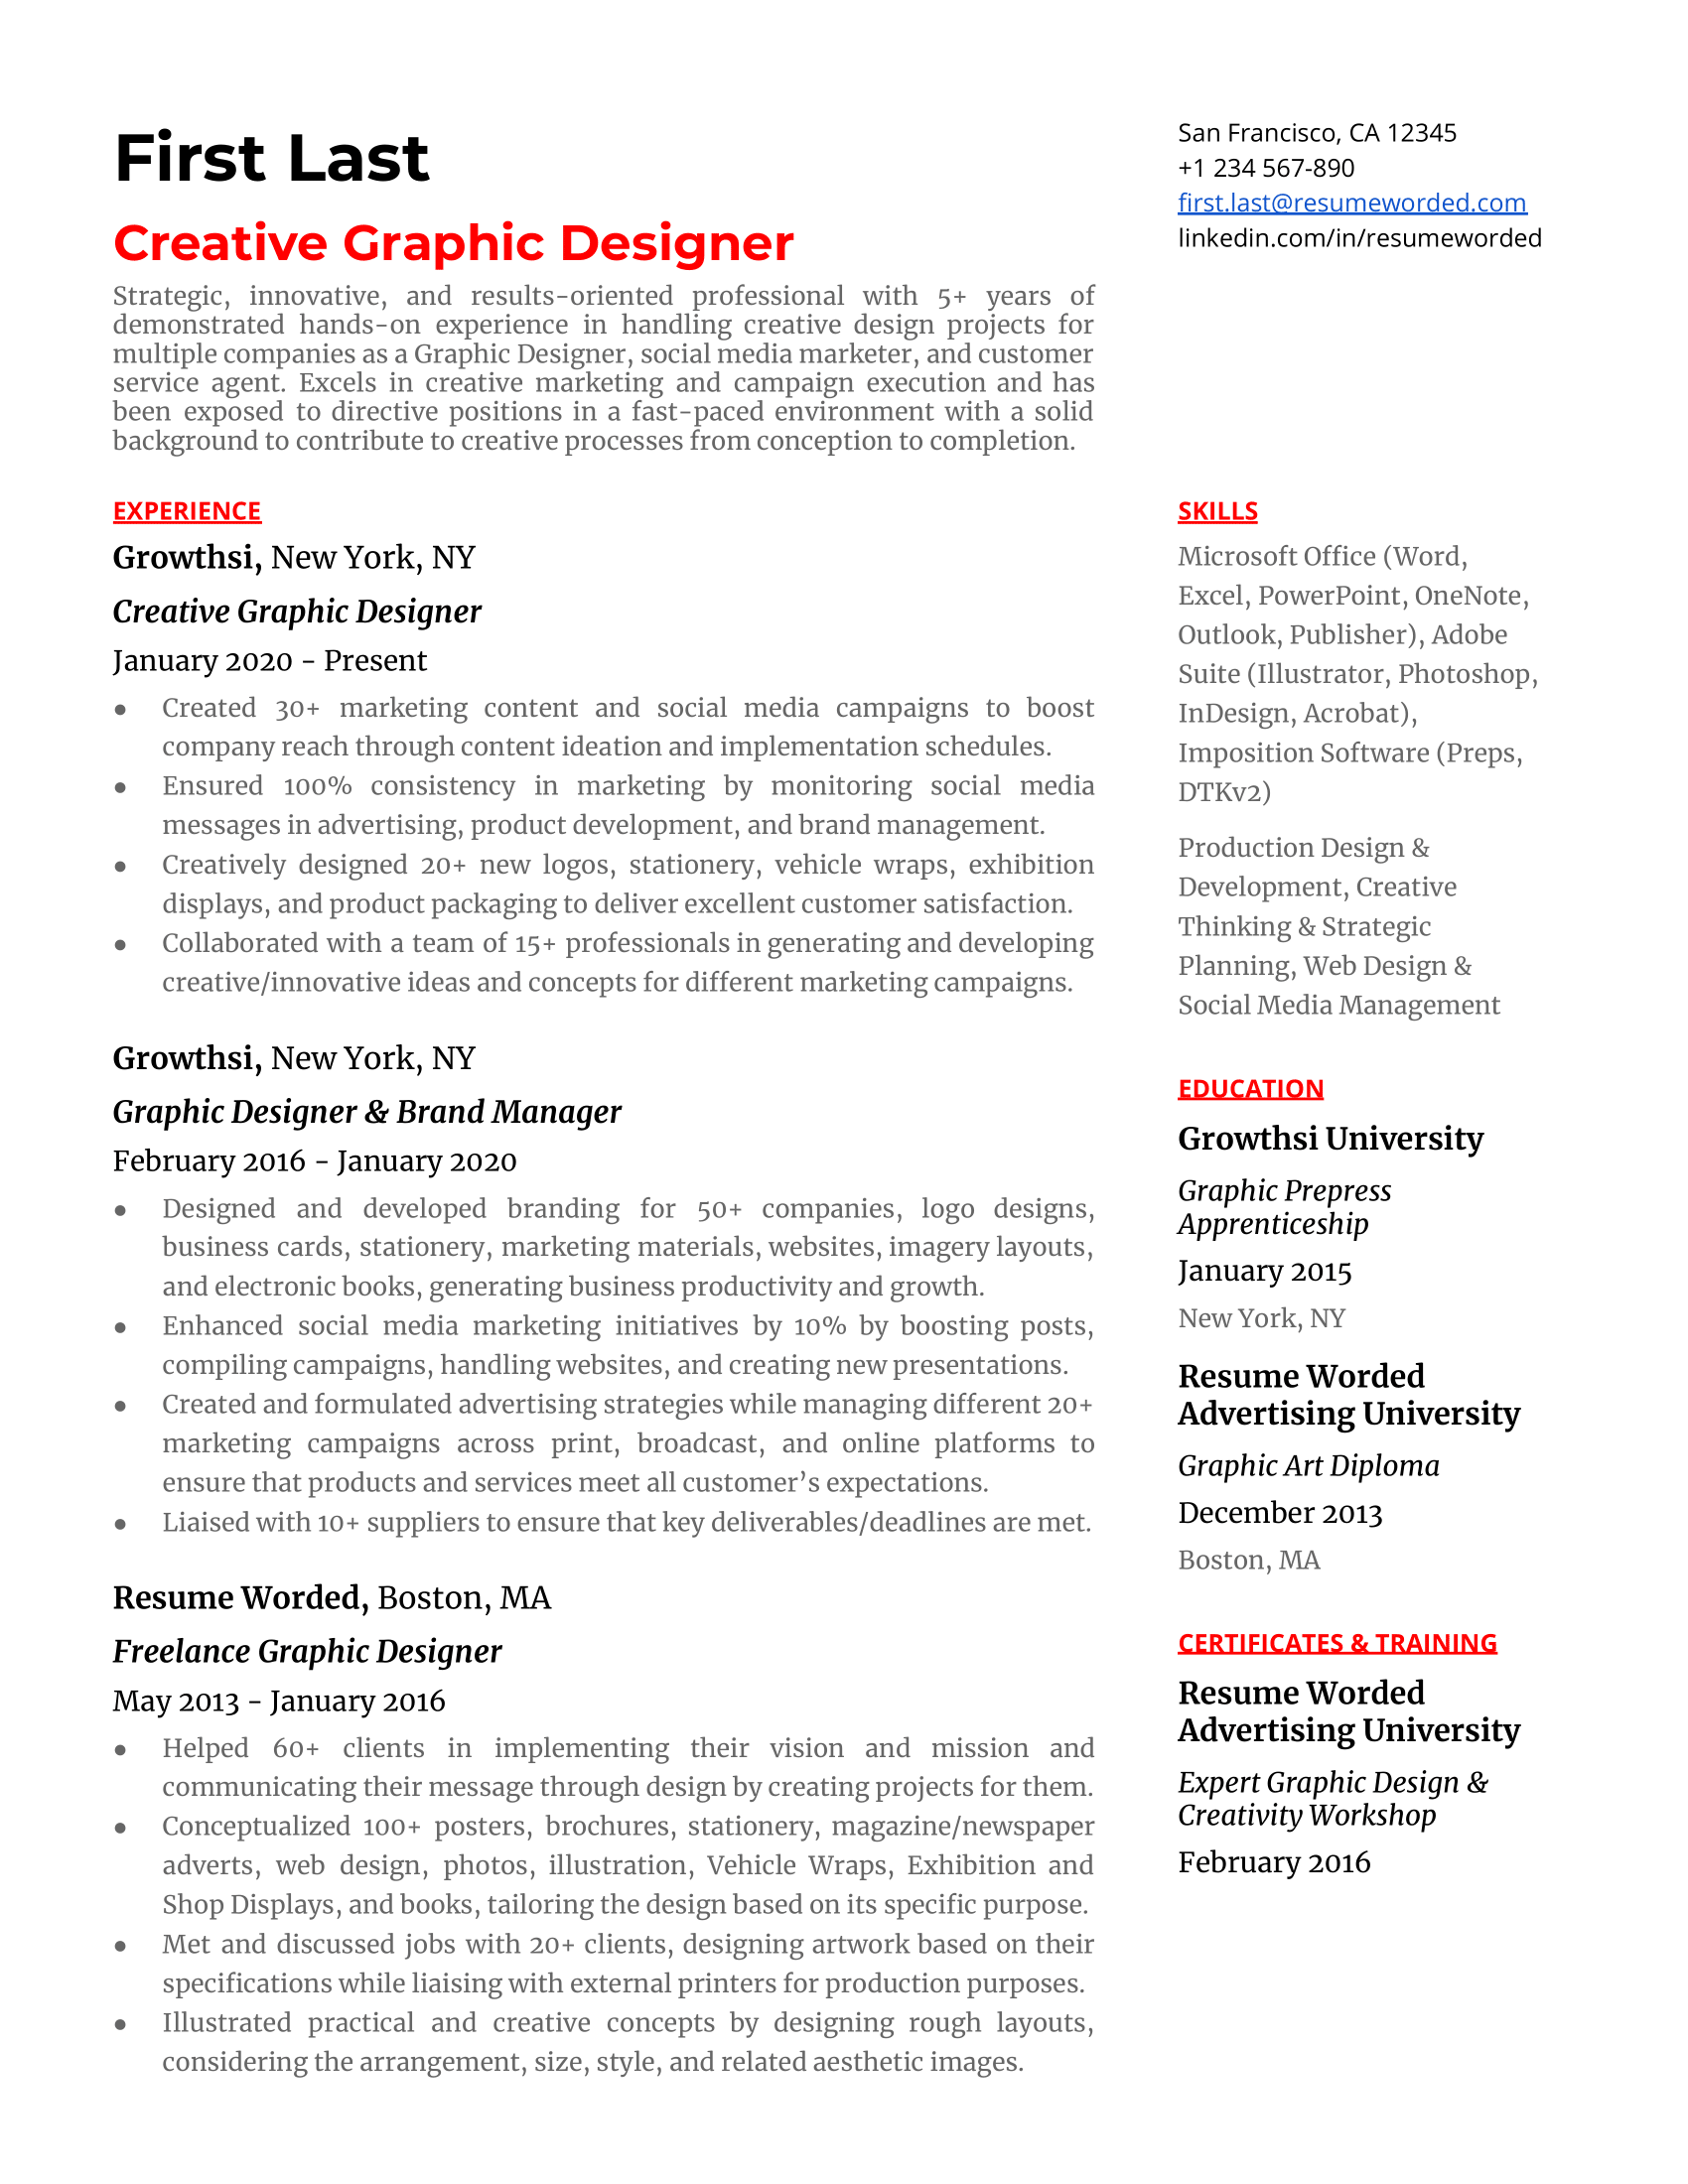 A creative graphic designer resume template using strong metrics to illustrate accomplishments.